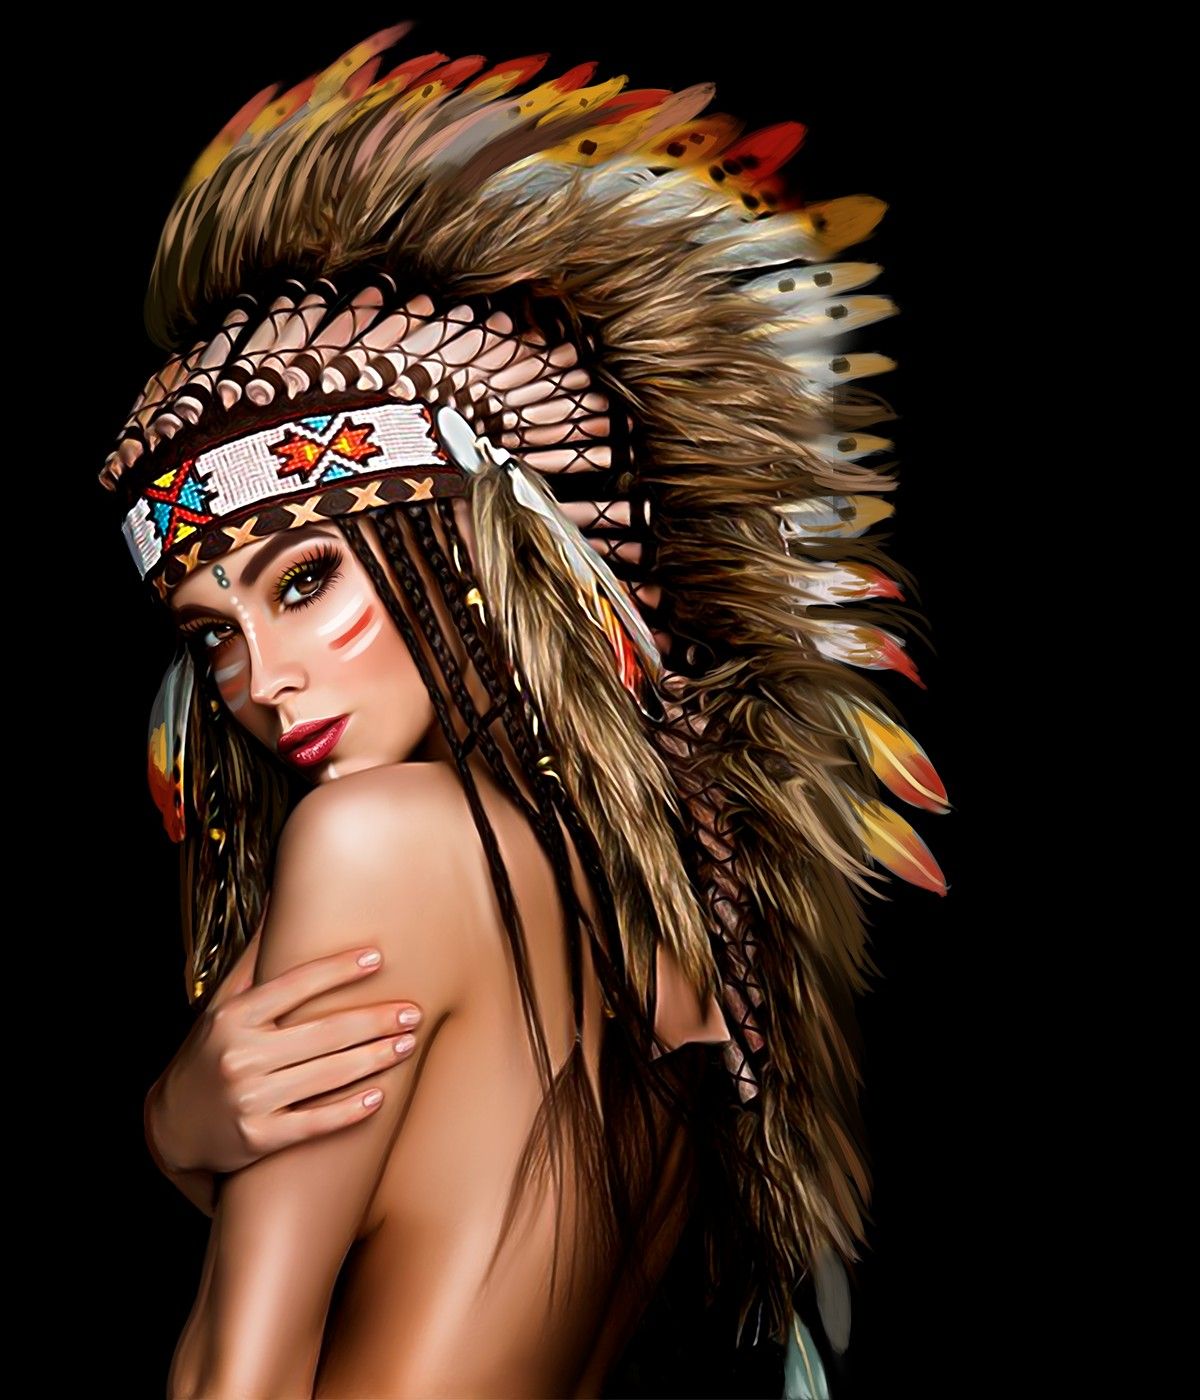 darren coldwell recommends native american girl xxx pic